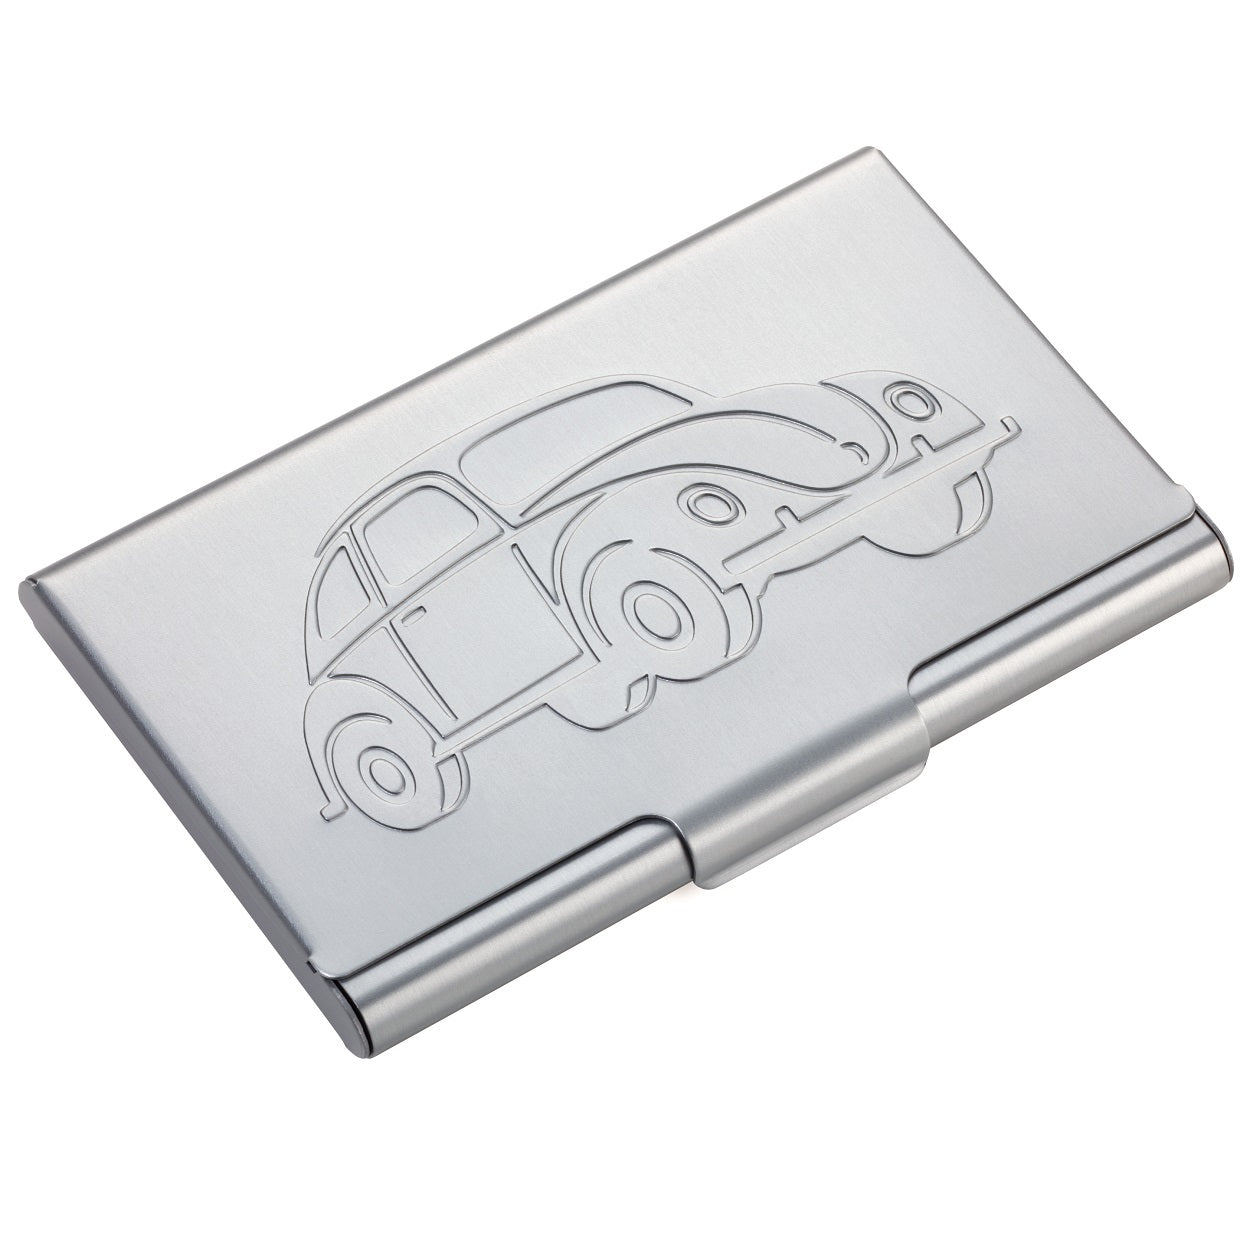 TROIKA Credit Card Case with RFID Shielding VW BEETLE